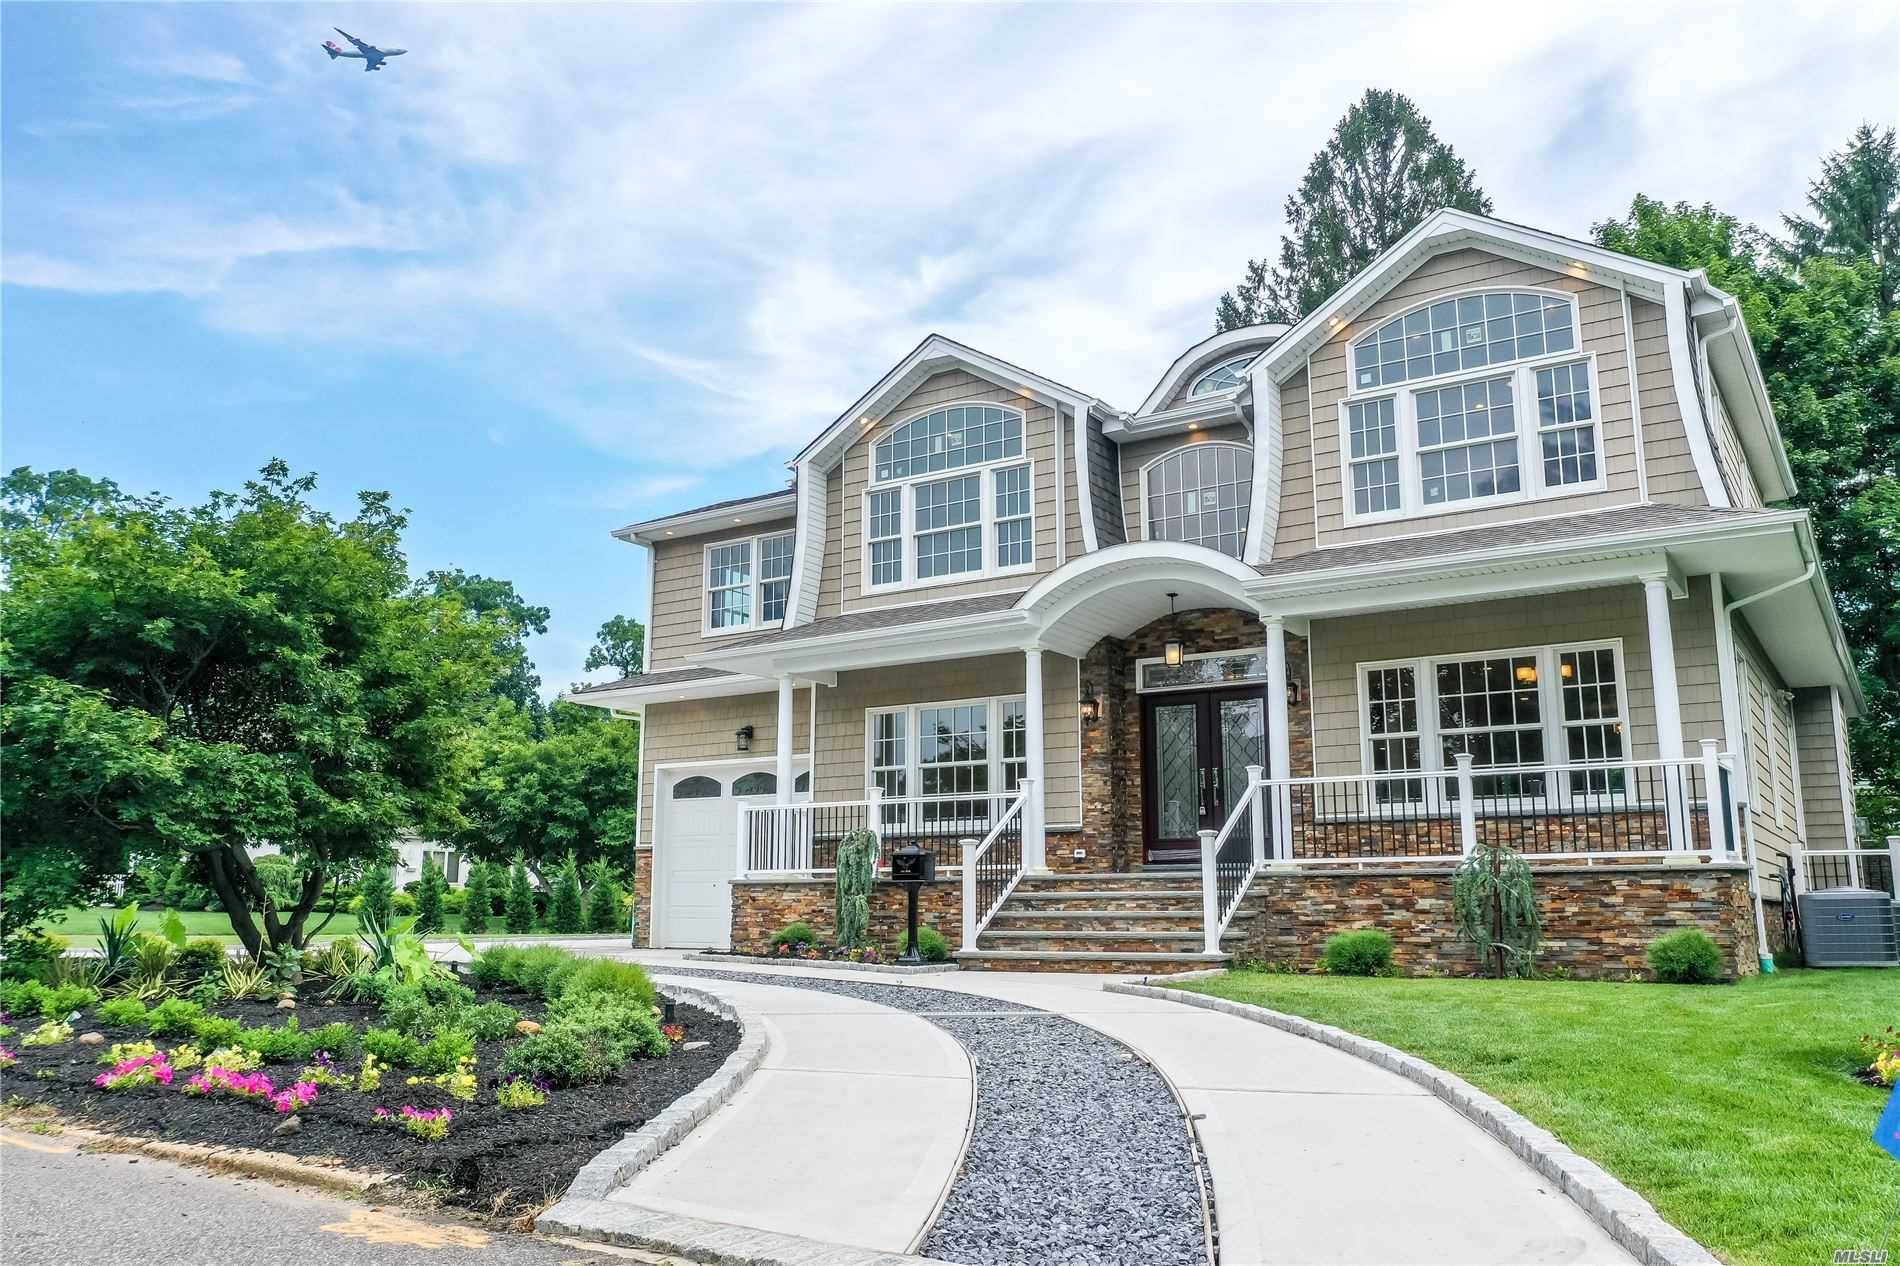 Live in this indisputable tranquility almost 4000 SF house on large property with circular driveway and gorgeous flower beds and landscape, designer porches, Trex deck with gas line for BBQ ...